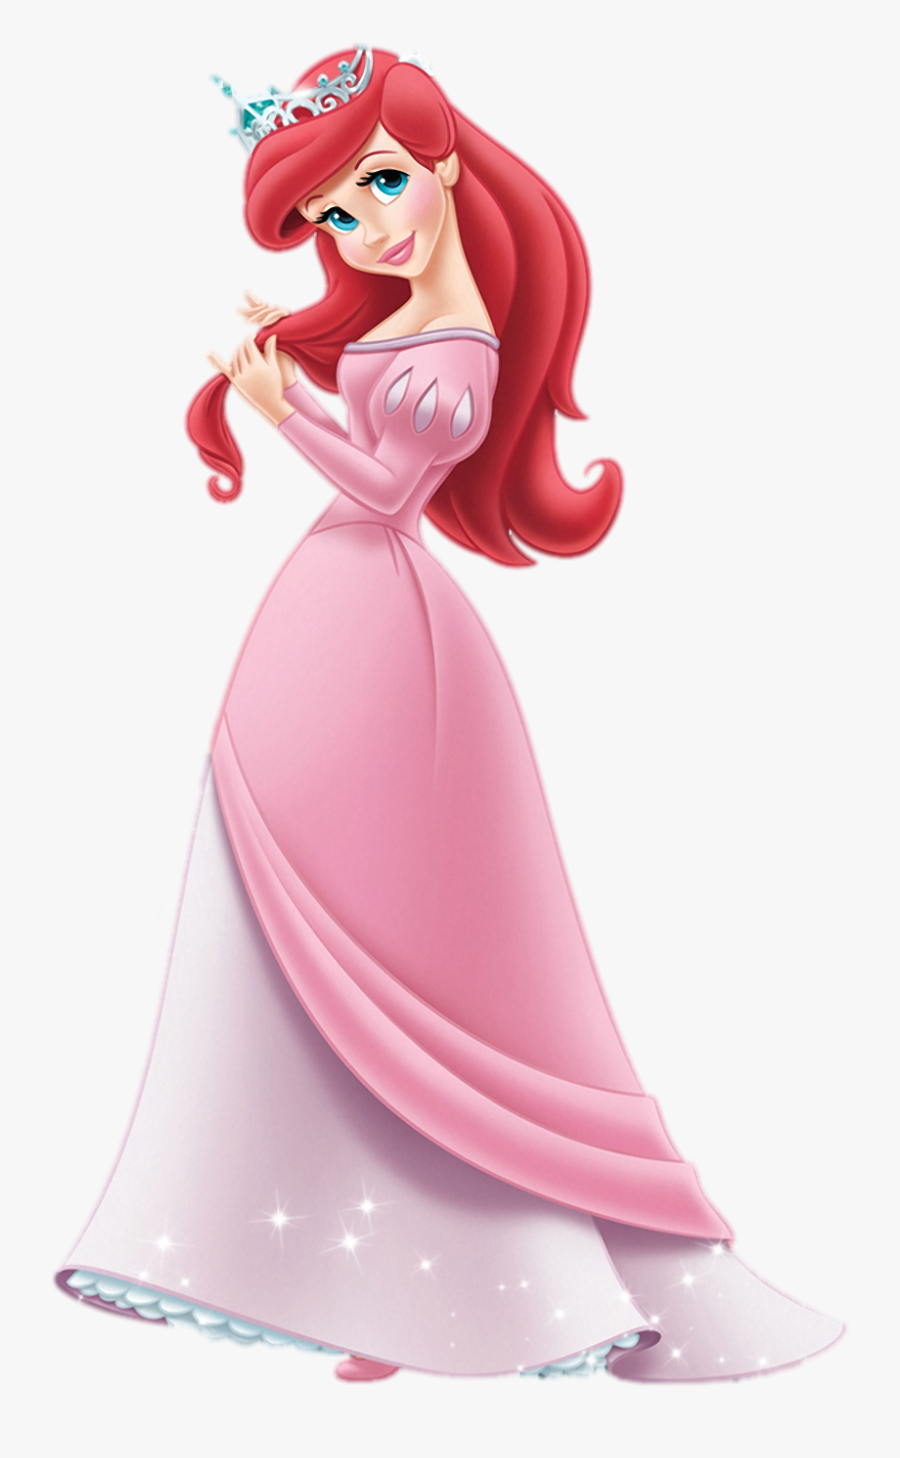 Ariel The Little Mermaid The Prince Belle Disney Princess - Aurora Ariel Disney Princess, Transparent Clipart